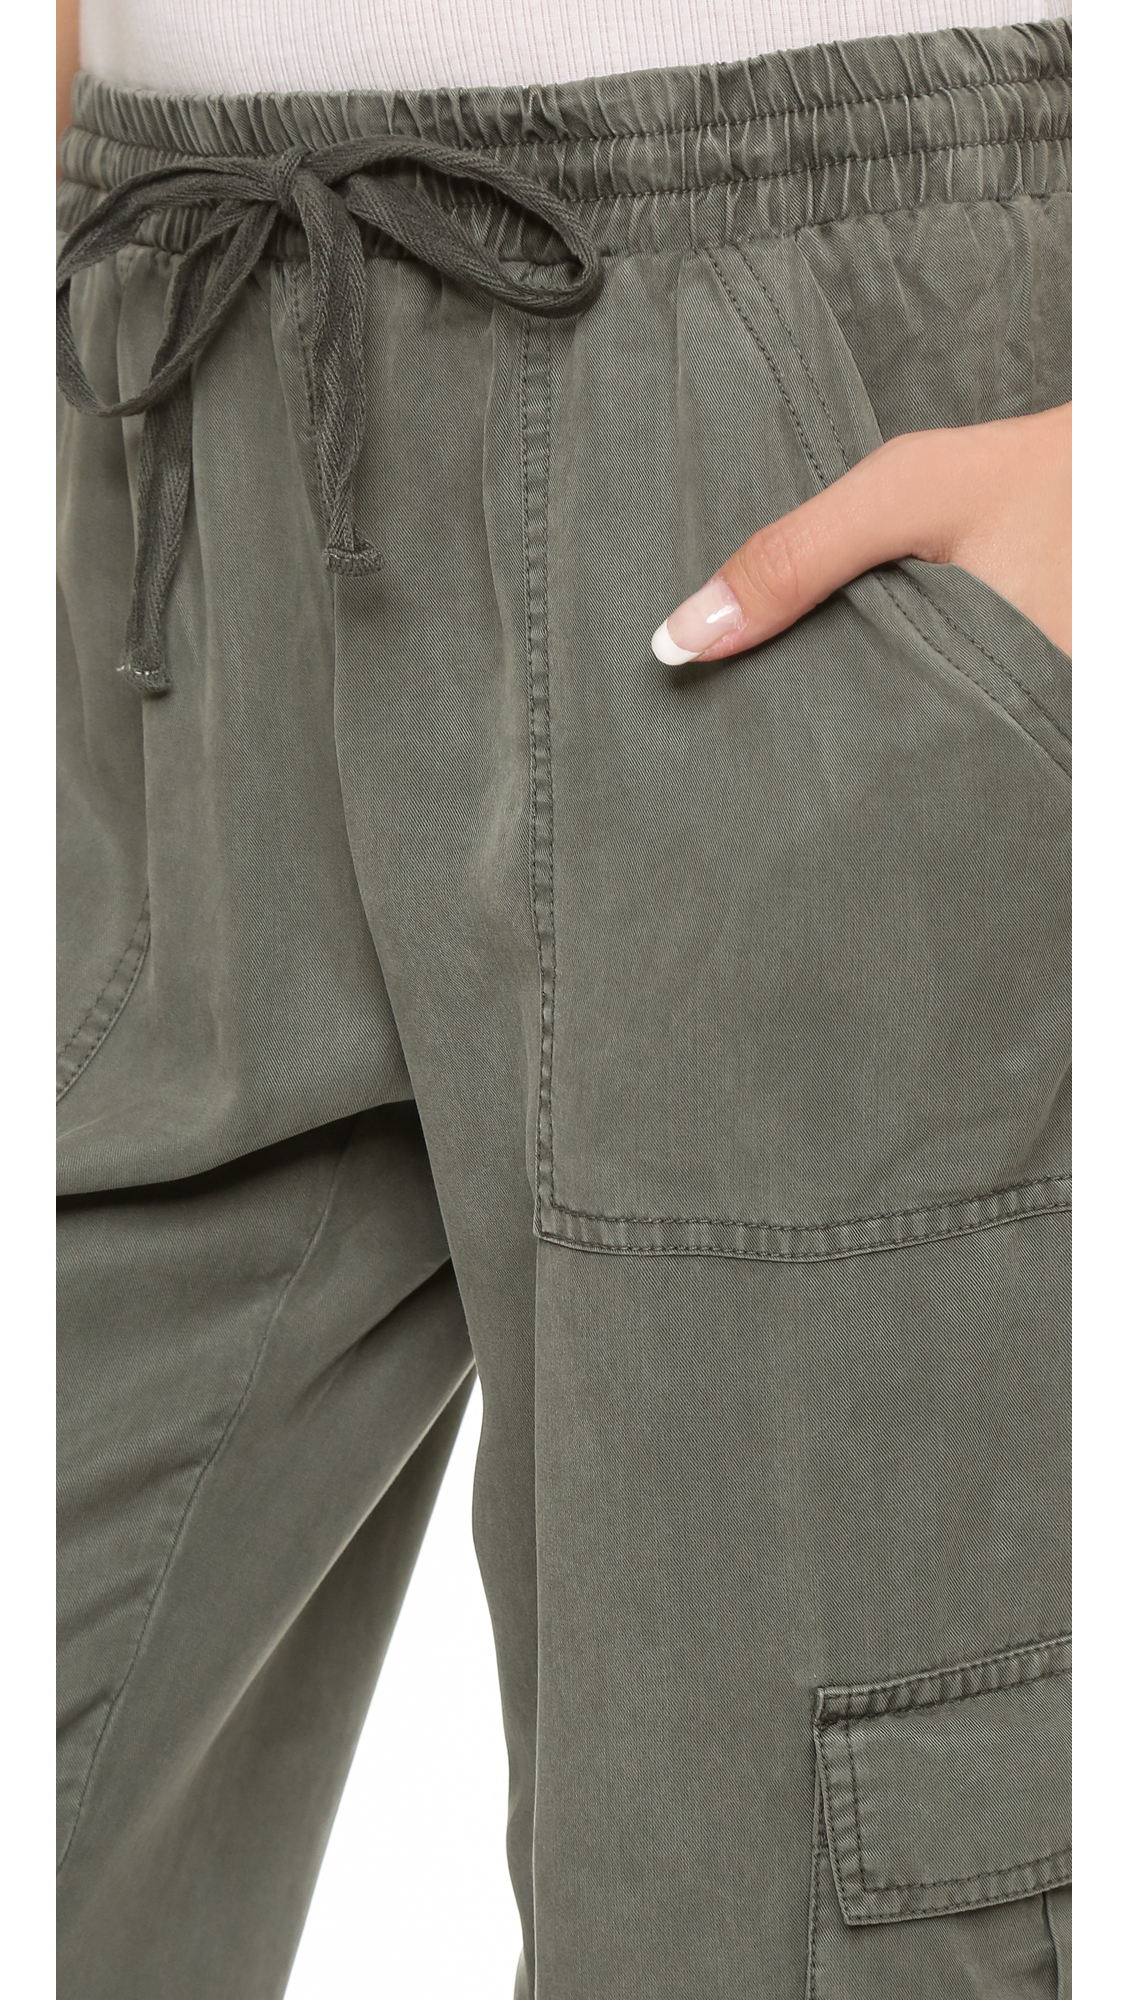 Lyst - Young Fabulous & Broke Yfb Clothing Magnolia Pants - Olive in Green